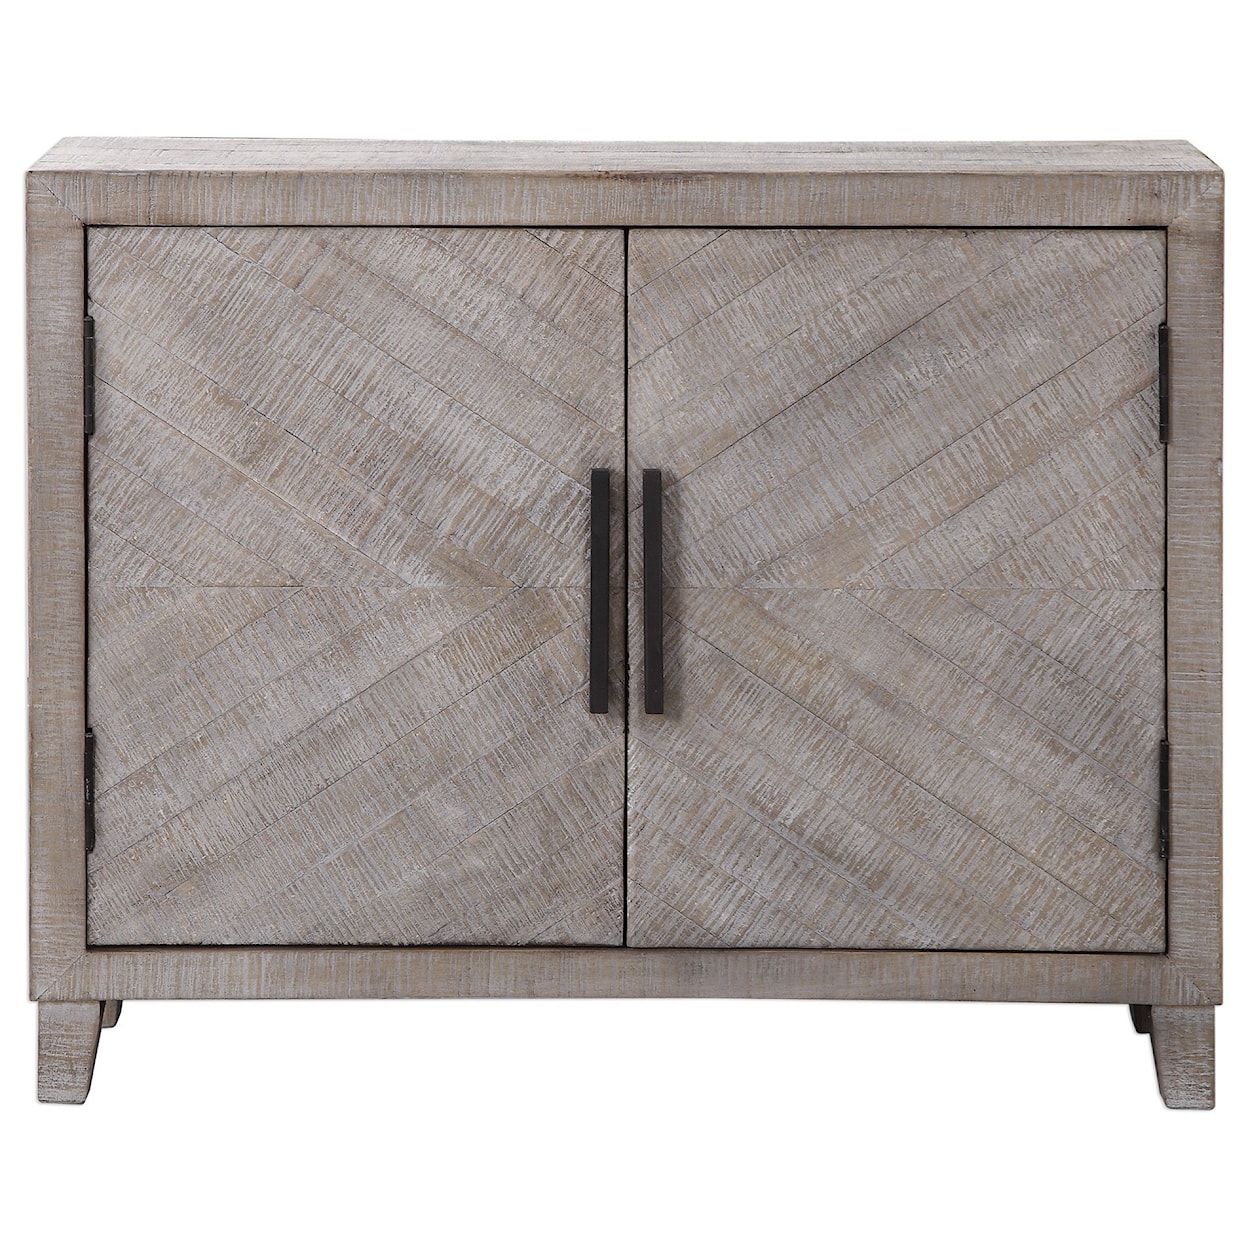 Uttermost Accent Furniture - Chests Adalind White Washed Accent Cabine